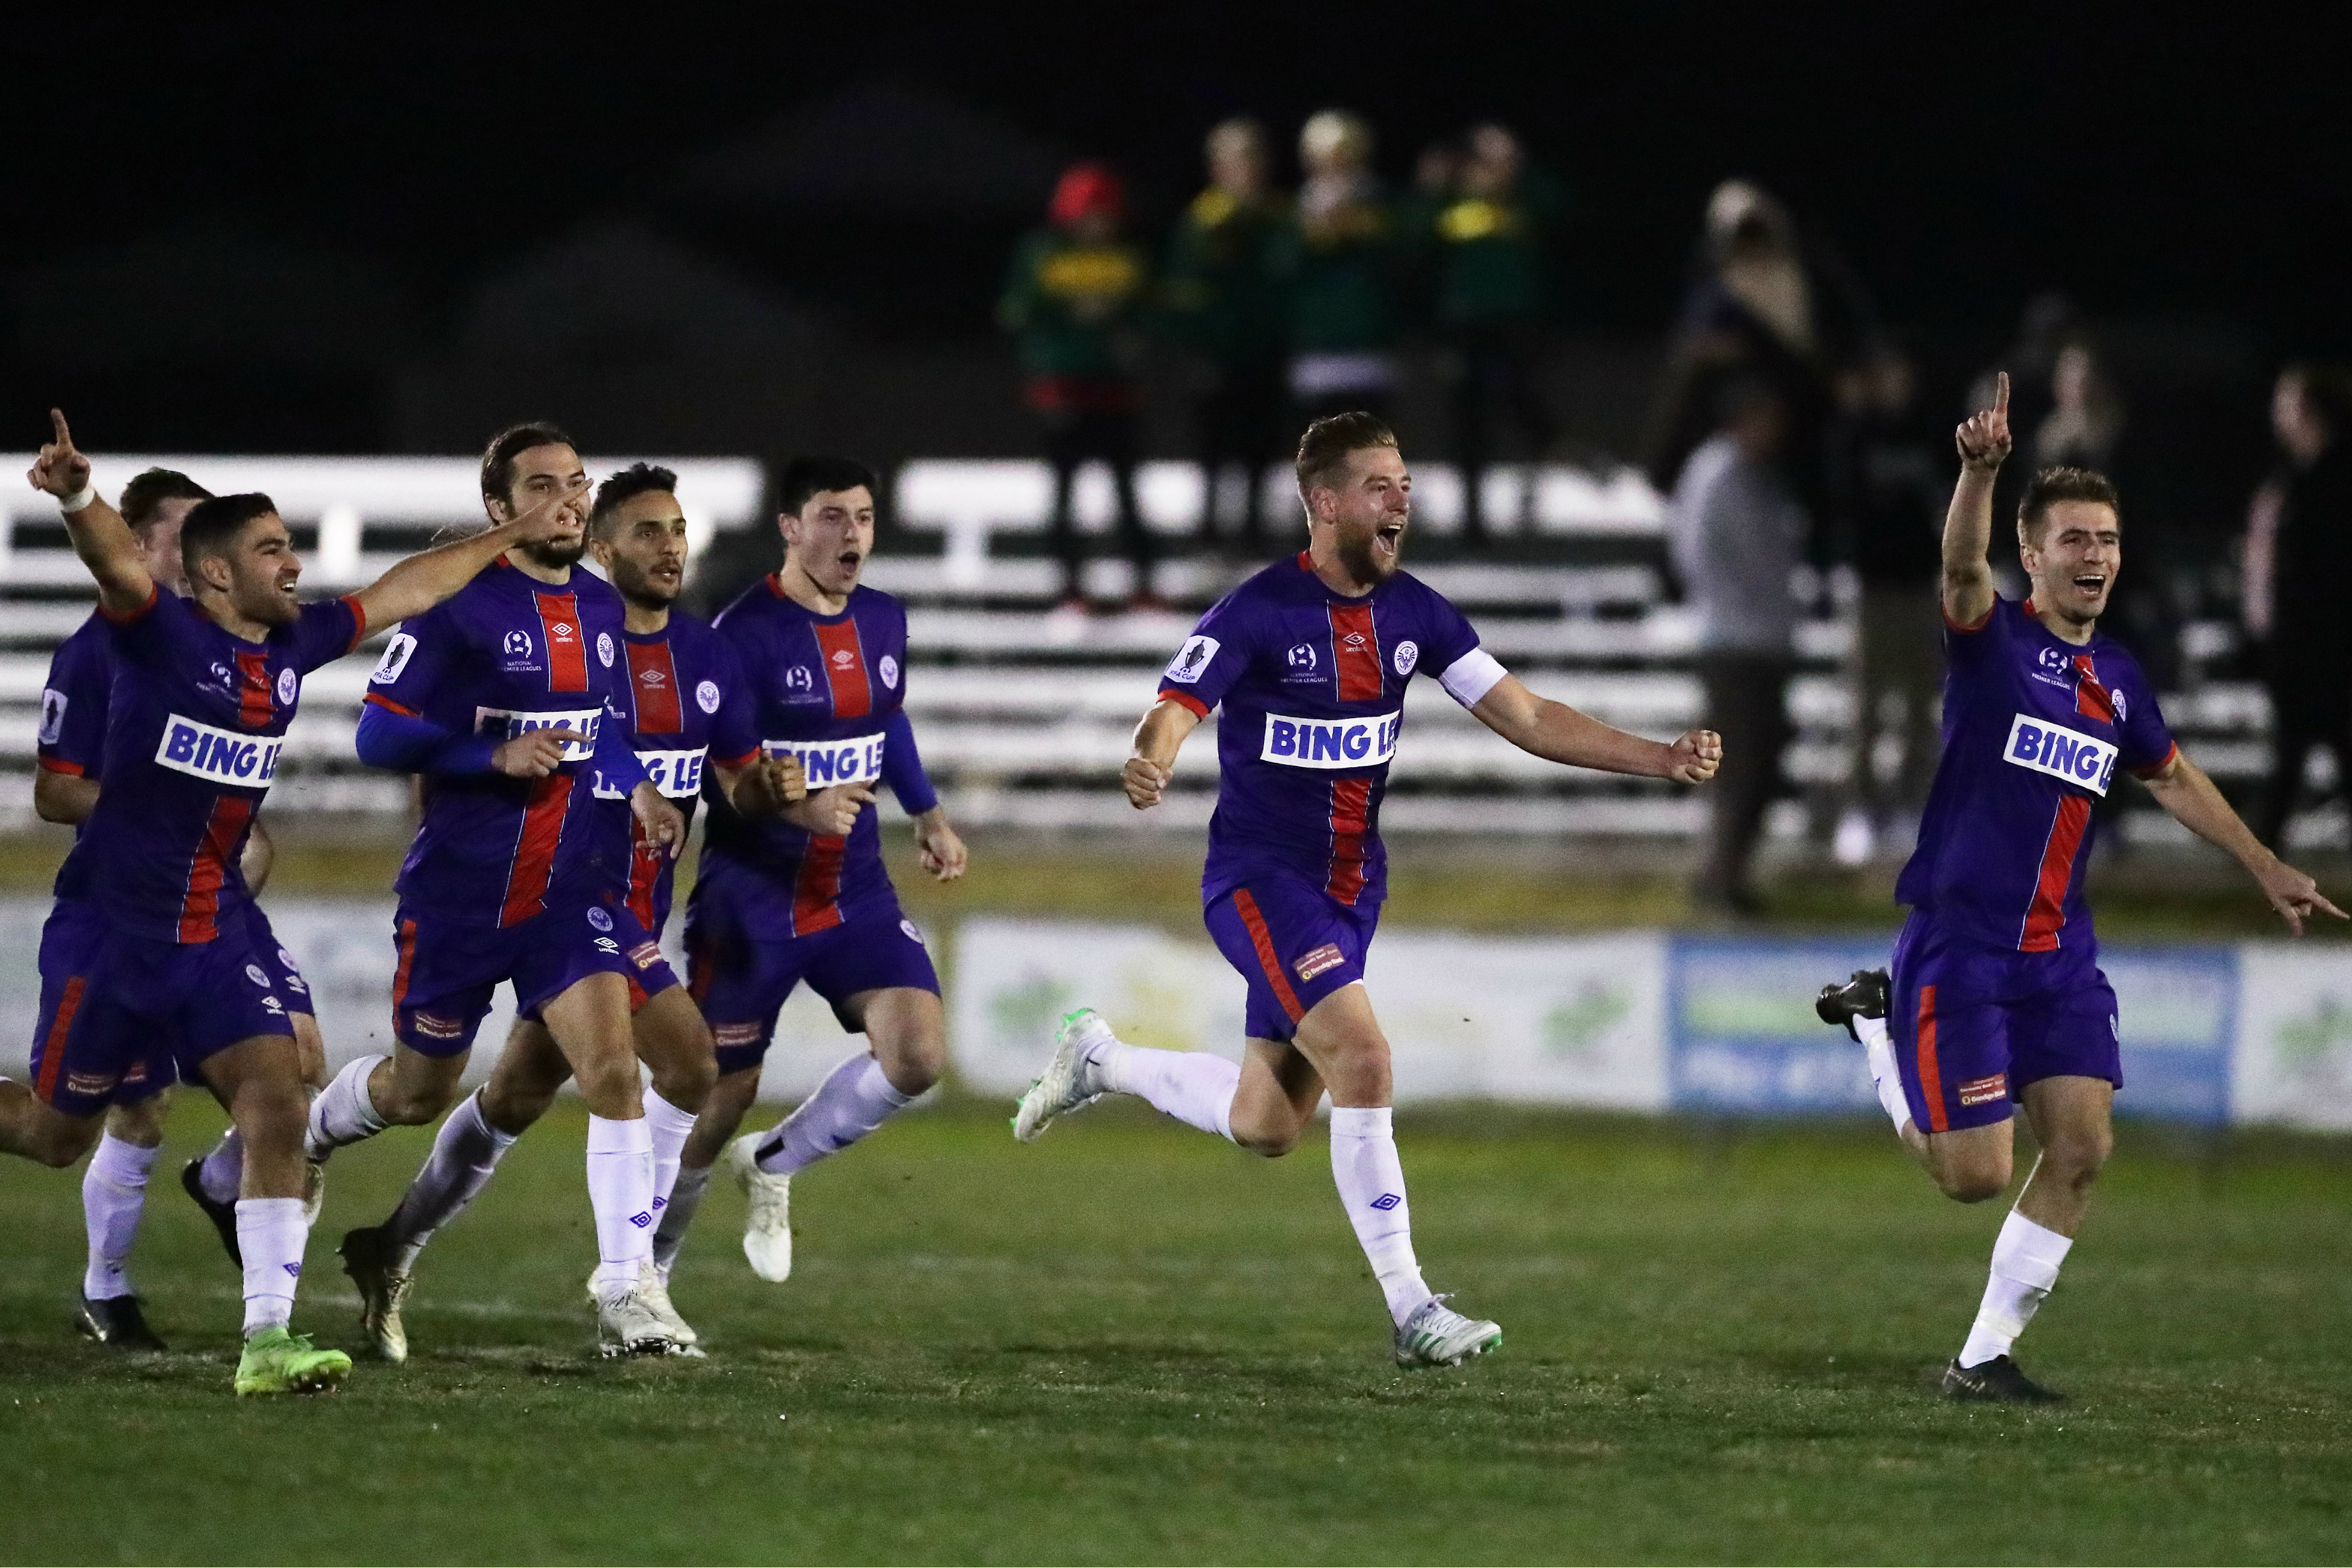 Manly United players race to celebrate after their epic penalty shootout victory